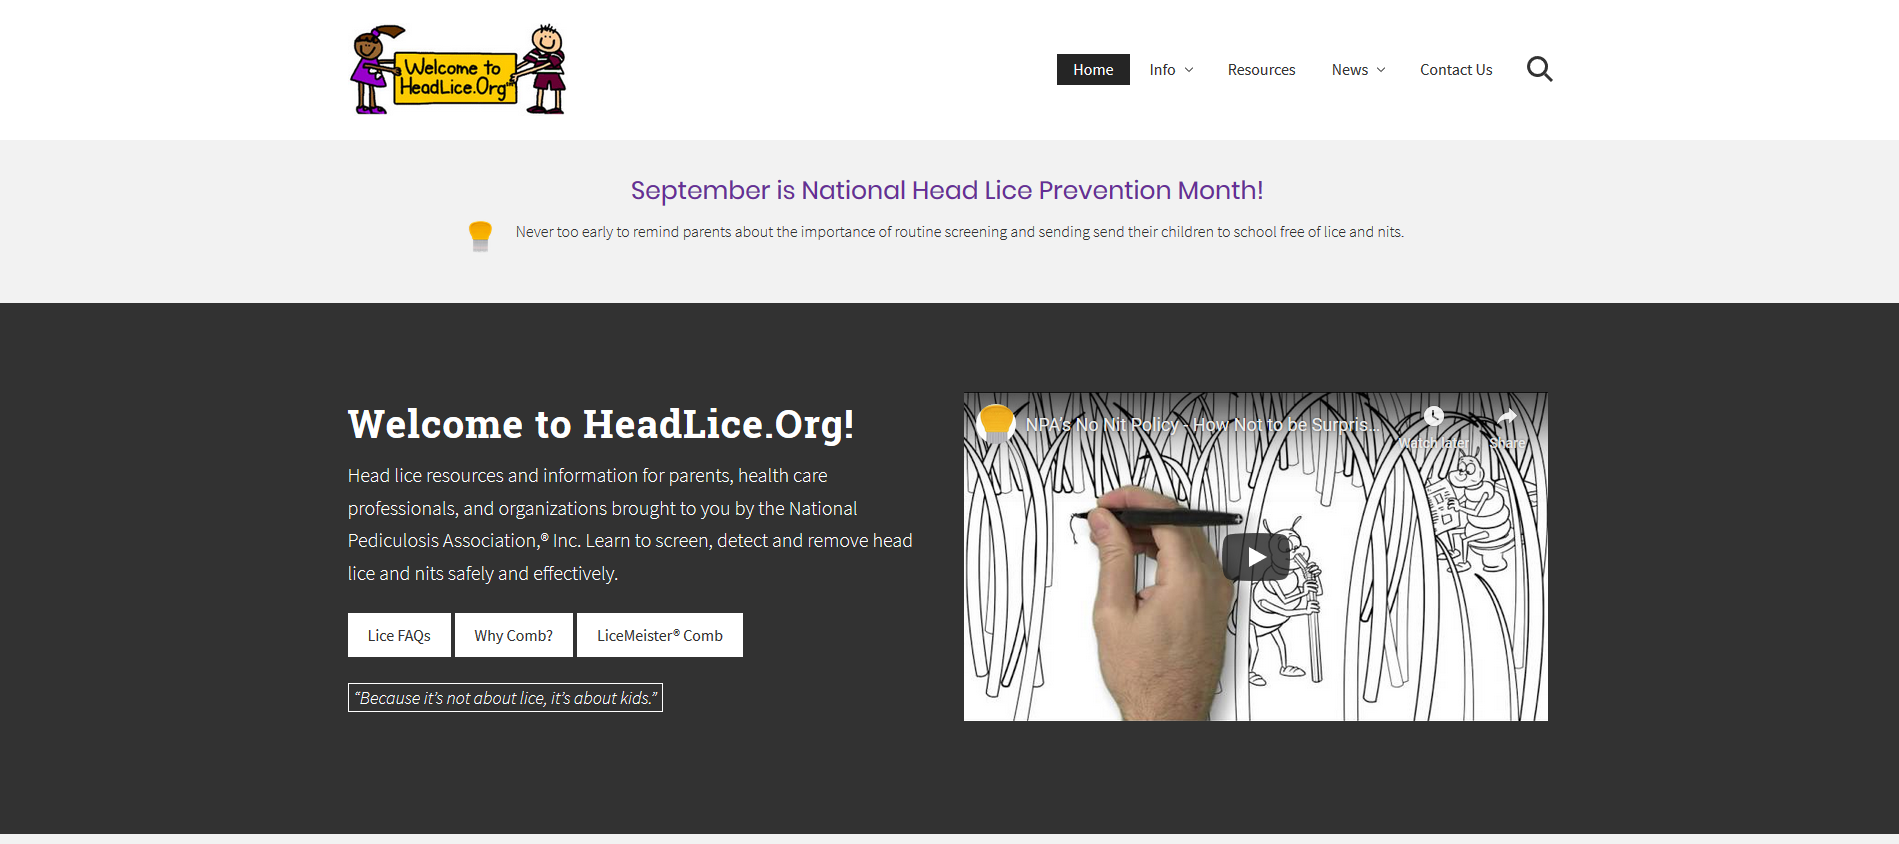 HeadLice.Org recently received a brand new design